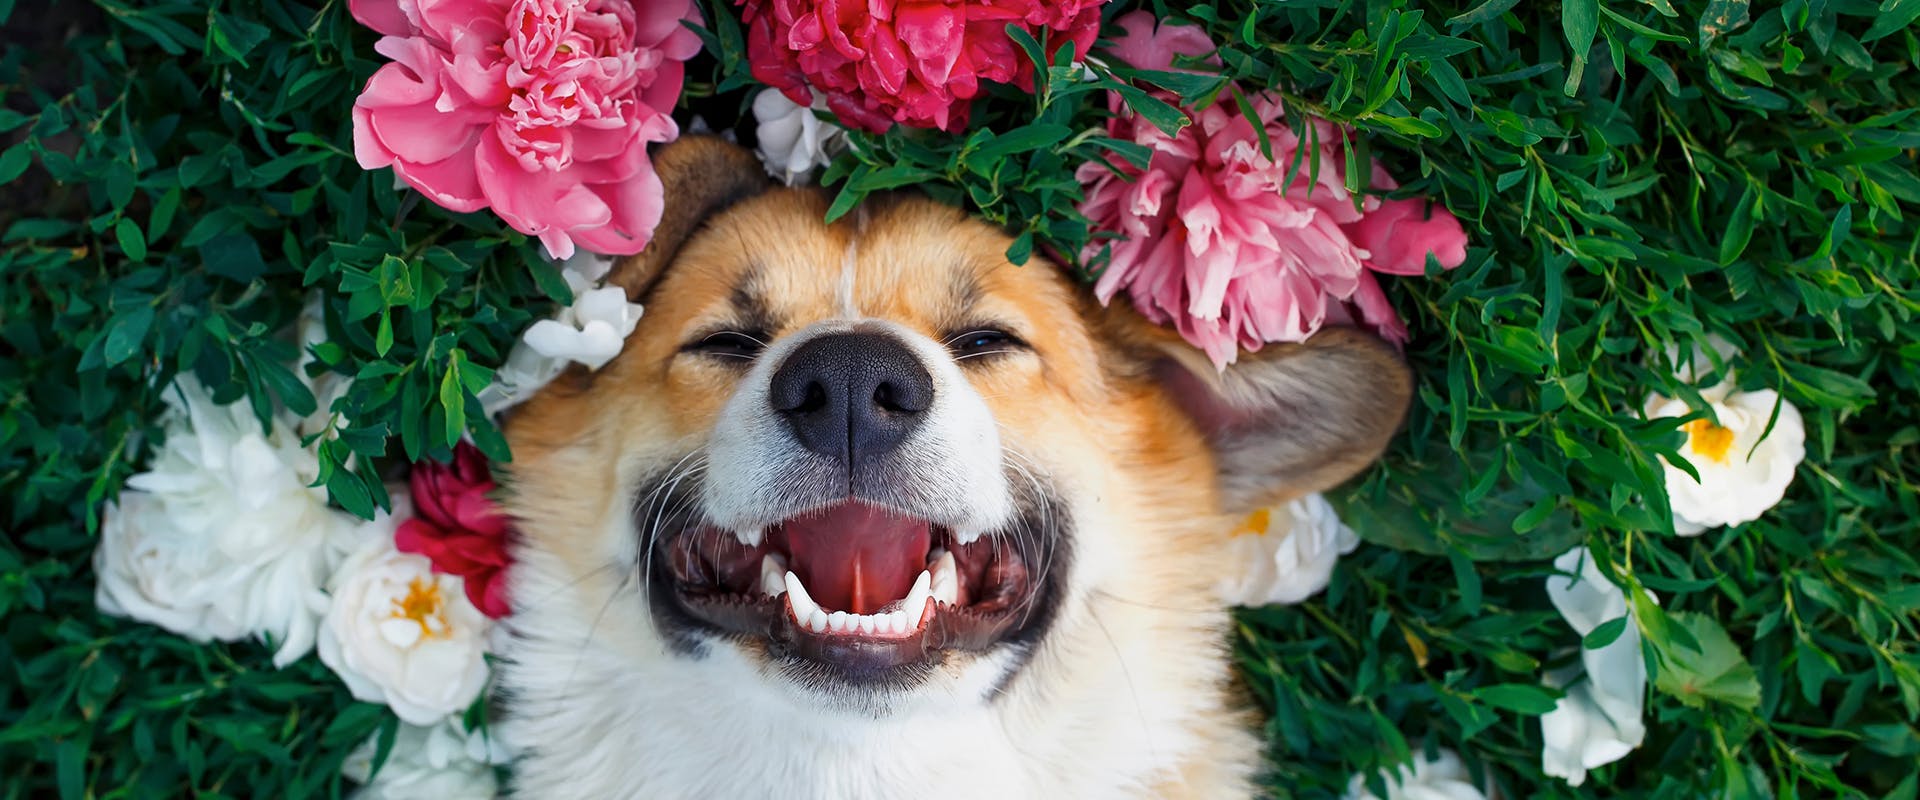 A dog laying in a field of flowers